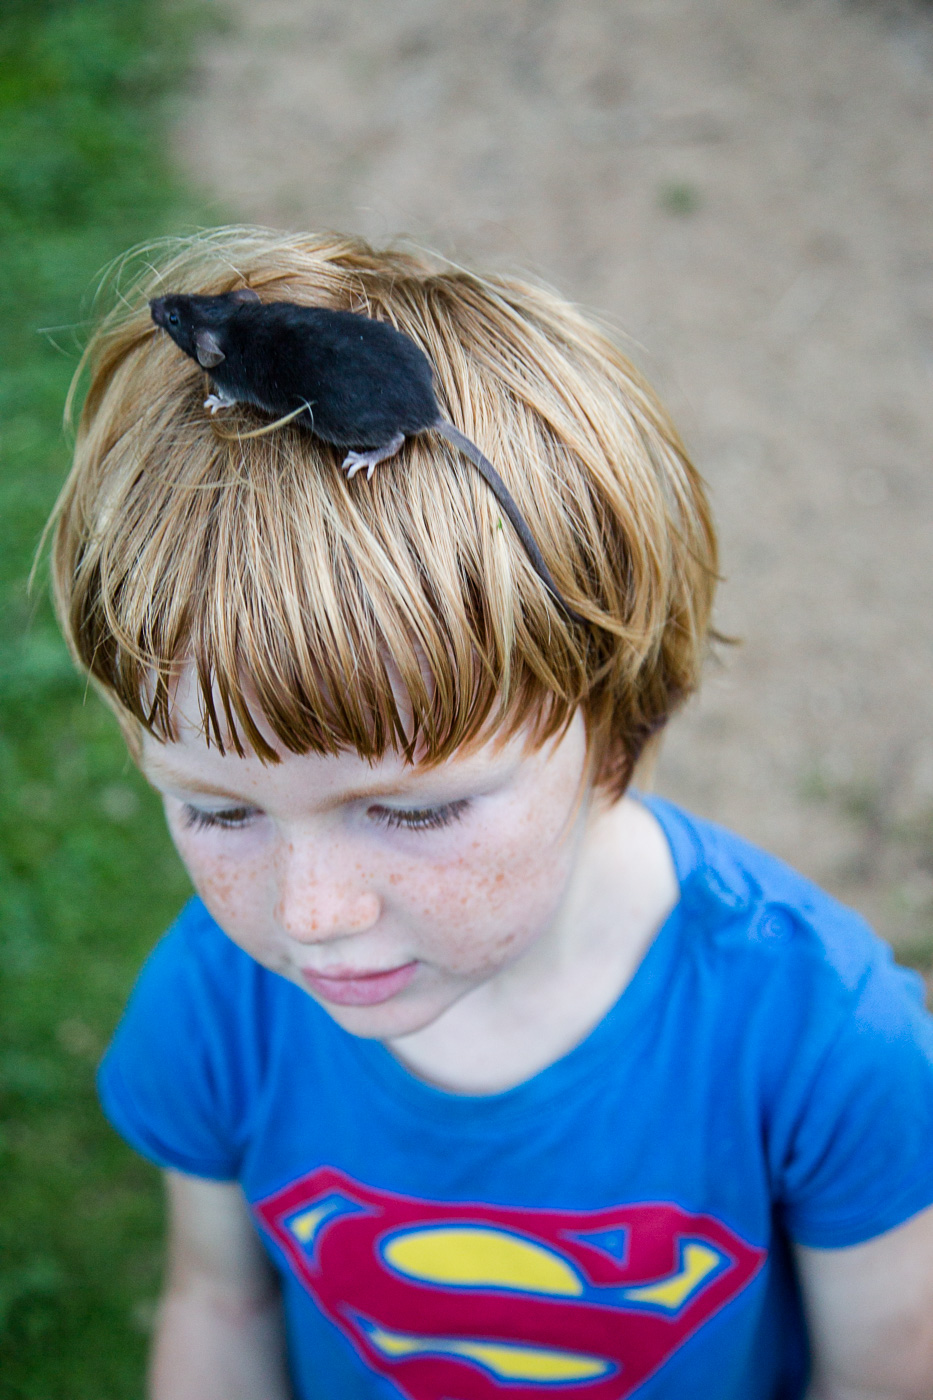 Sara Stathas portrait photographer - a boy with his pet mouse on the top of his head